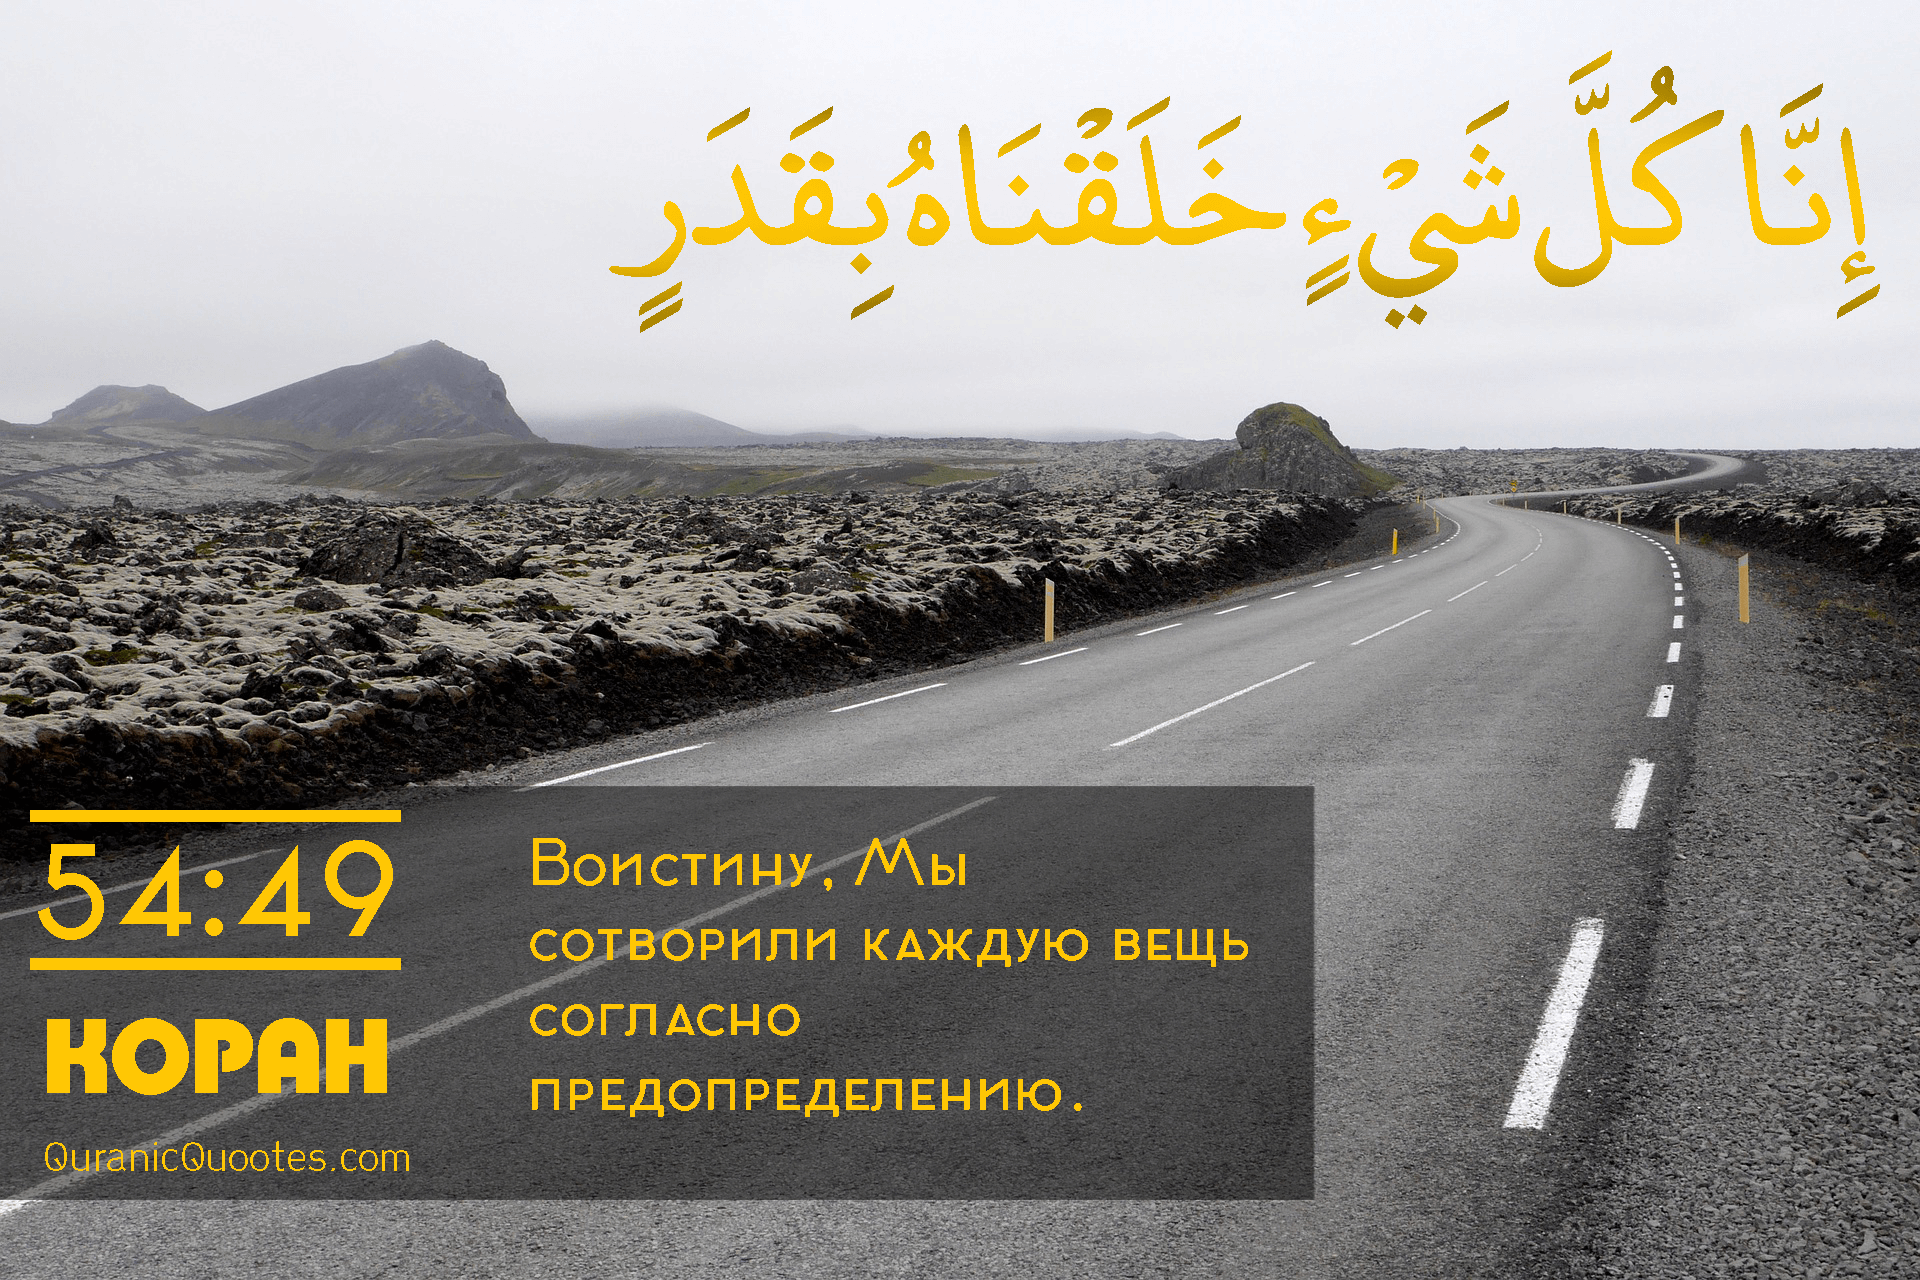 Quranic Quotes in Russian #38